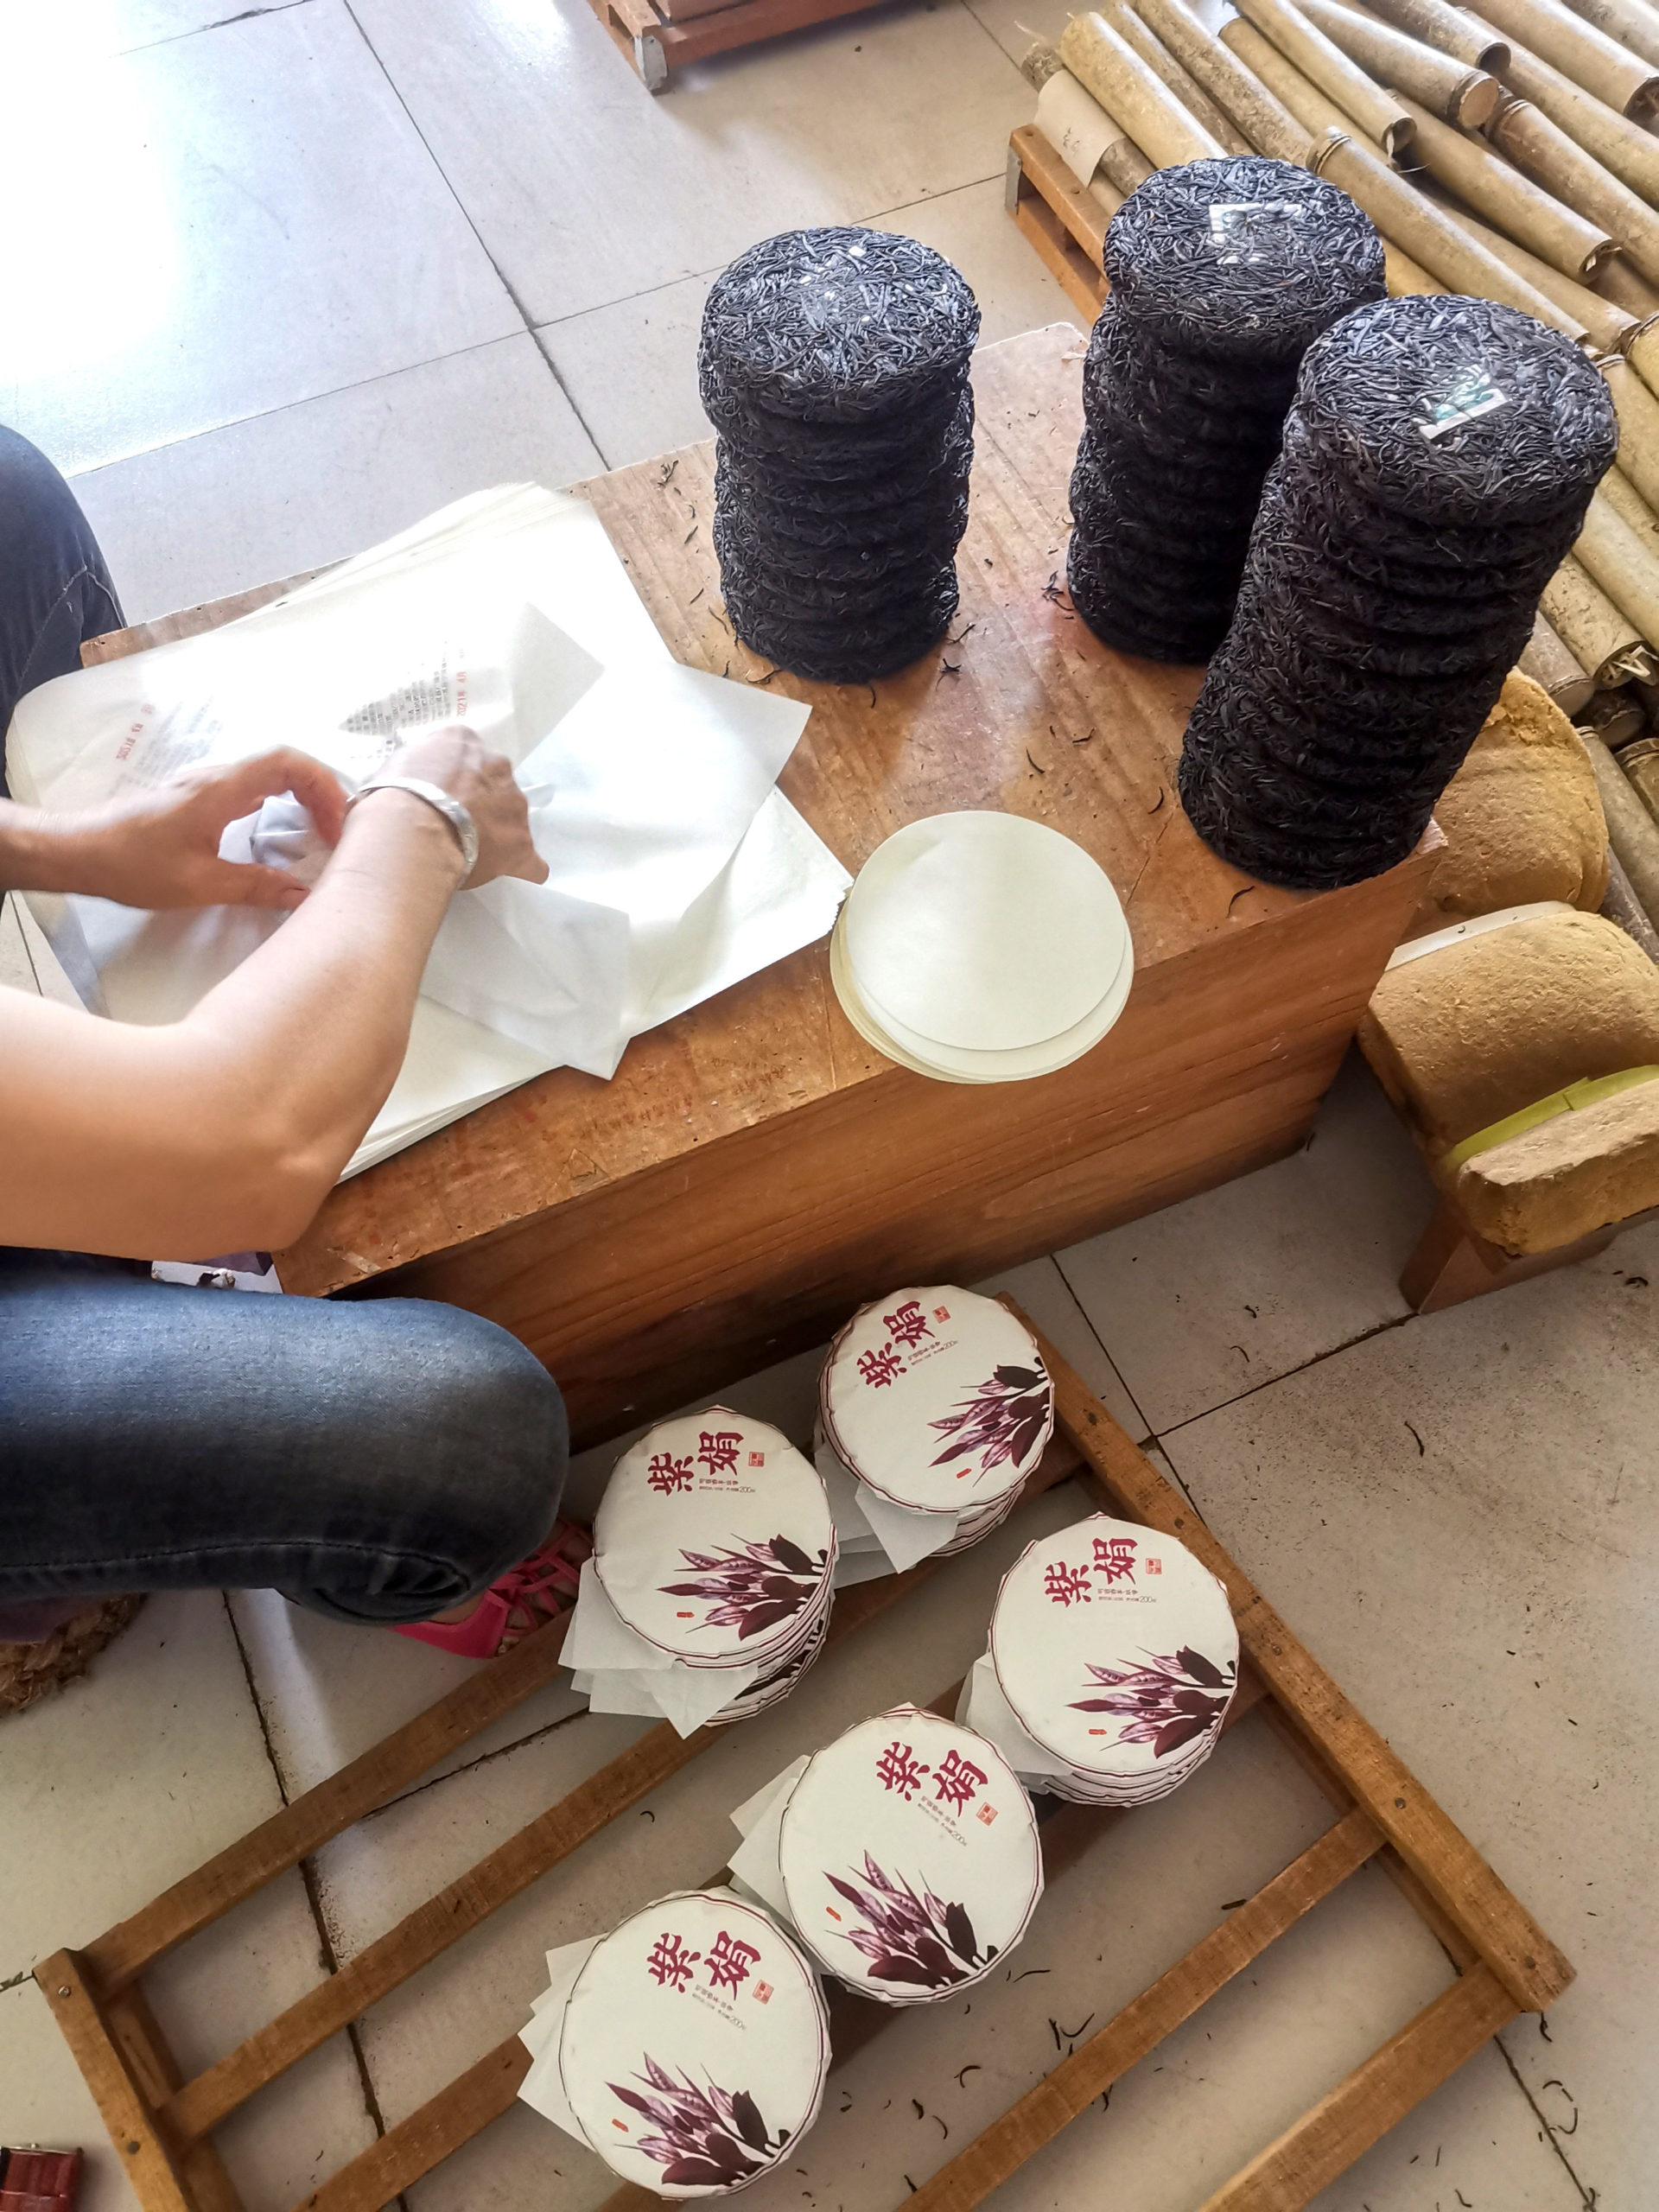 A person seated at a small workbench stacked high with finished small puer cakes, one by one wrapping them in paper and placing them on a wooden rack nearby.